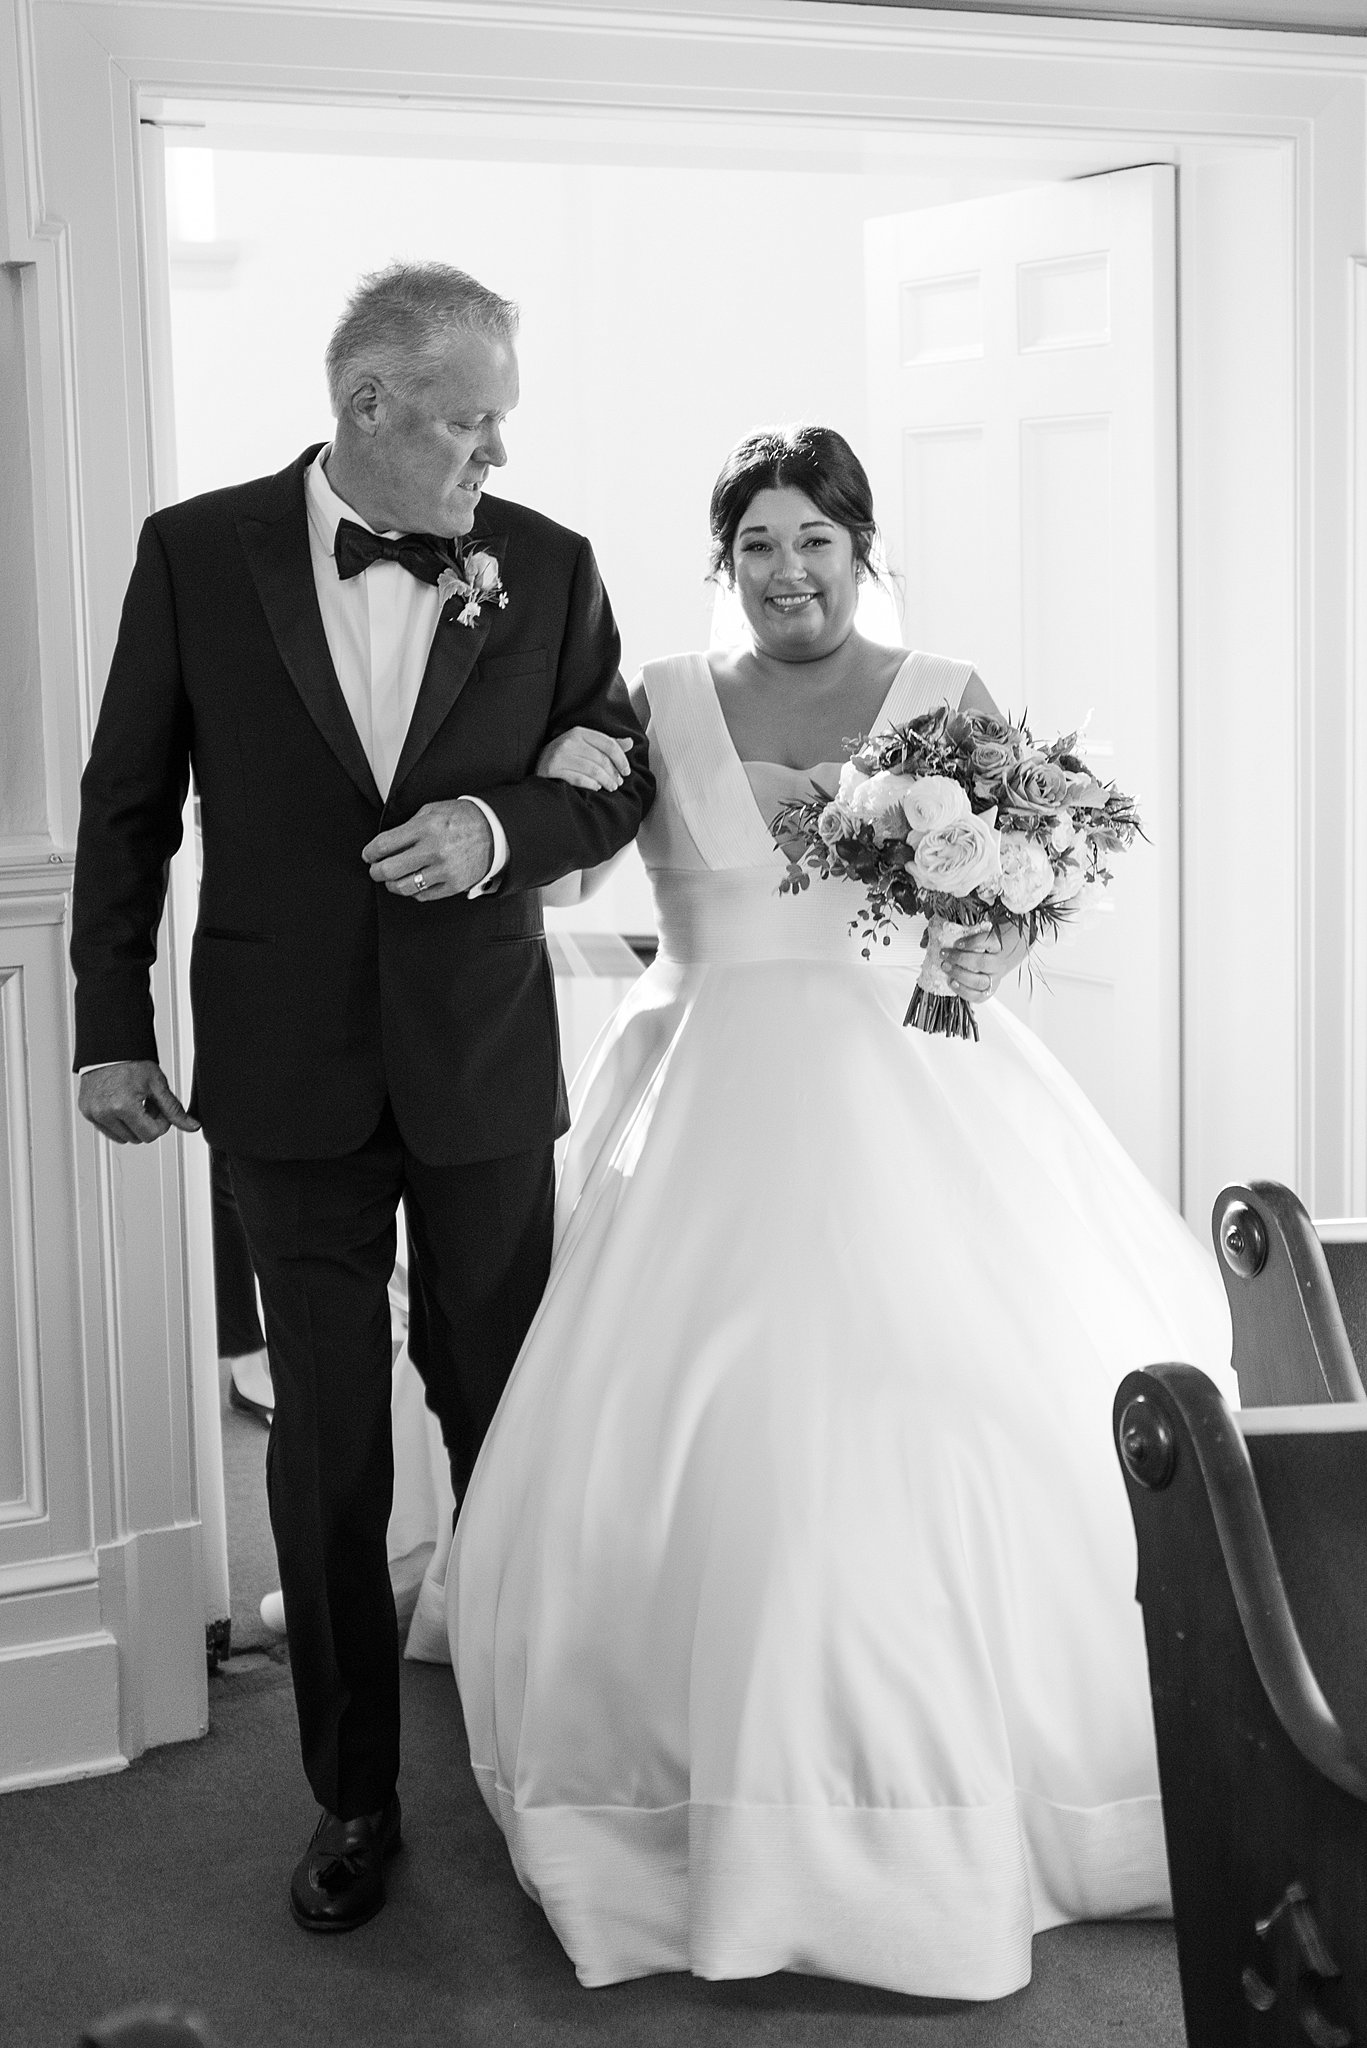 A father walks his daughter down the aisle at her ceremony